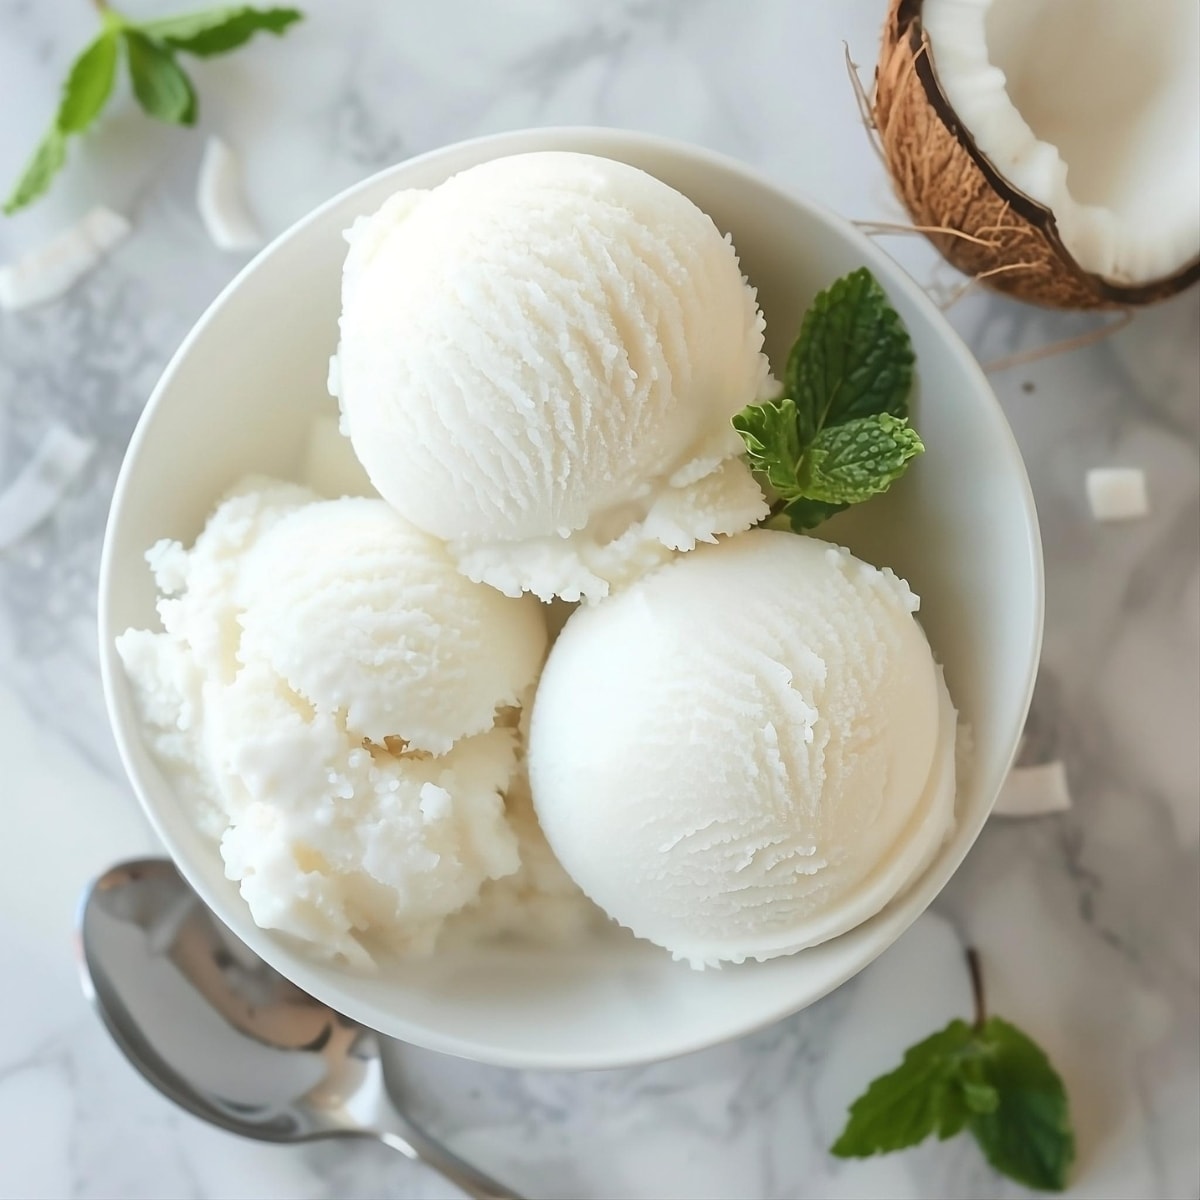 Scoops of coconut sorbet served in a white bowl garnished with mint.